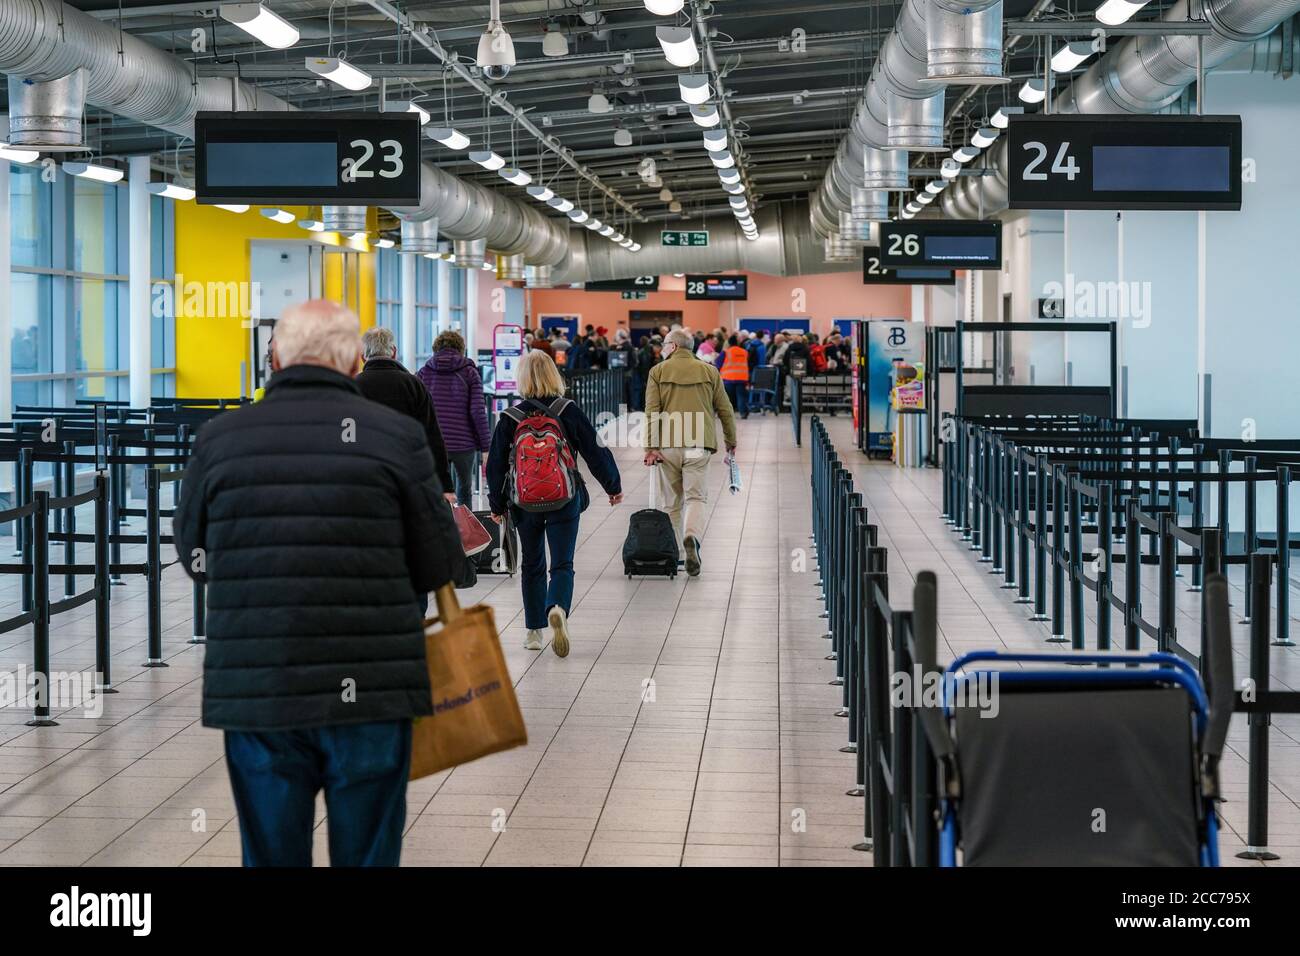 London, United Kingdom - February 05, 2019: Passengers walking in departure hall building to gate desk for their flight, at Luton Airport. LTN is 5th Stock Photo